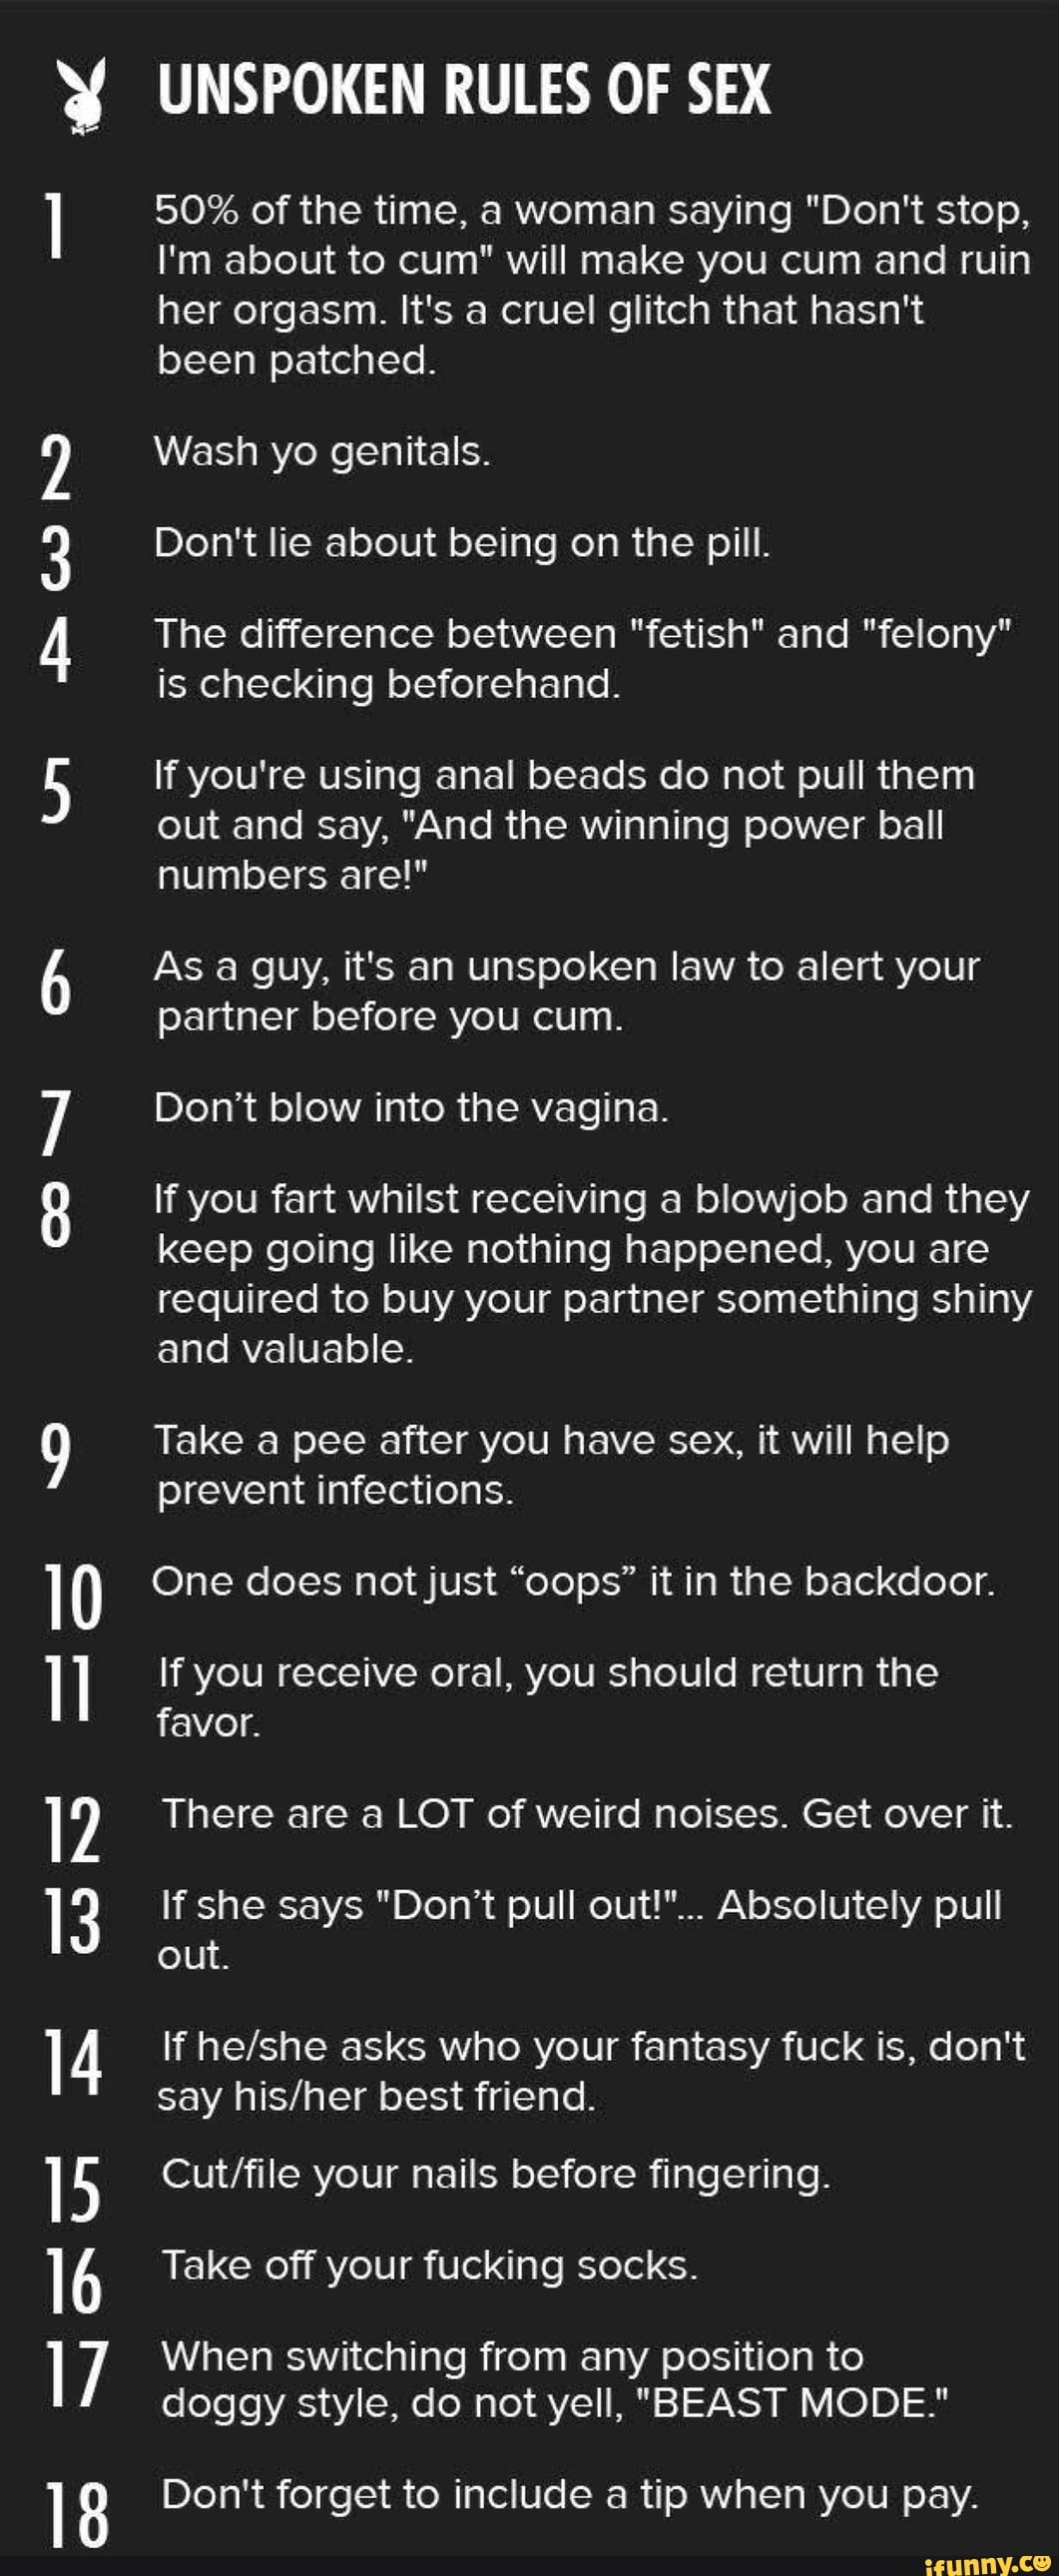 10 Is 14 18 UNSPOKEN RULES OF SEX 50% of the time, a woman saying